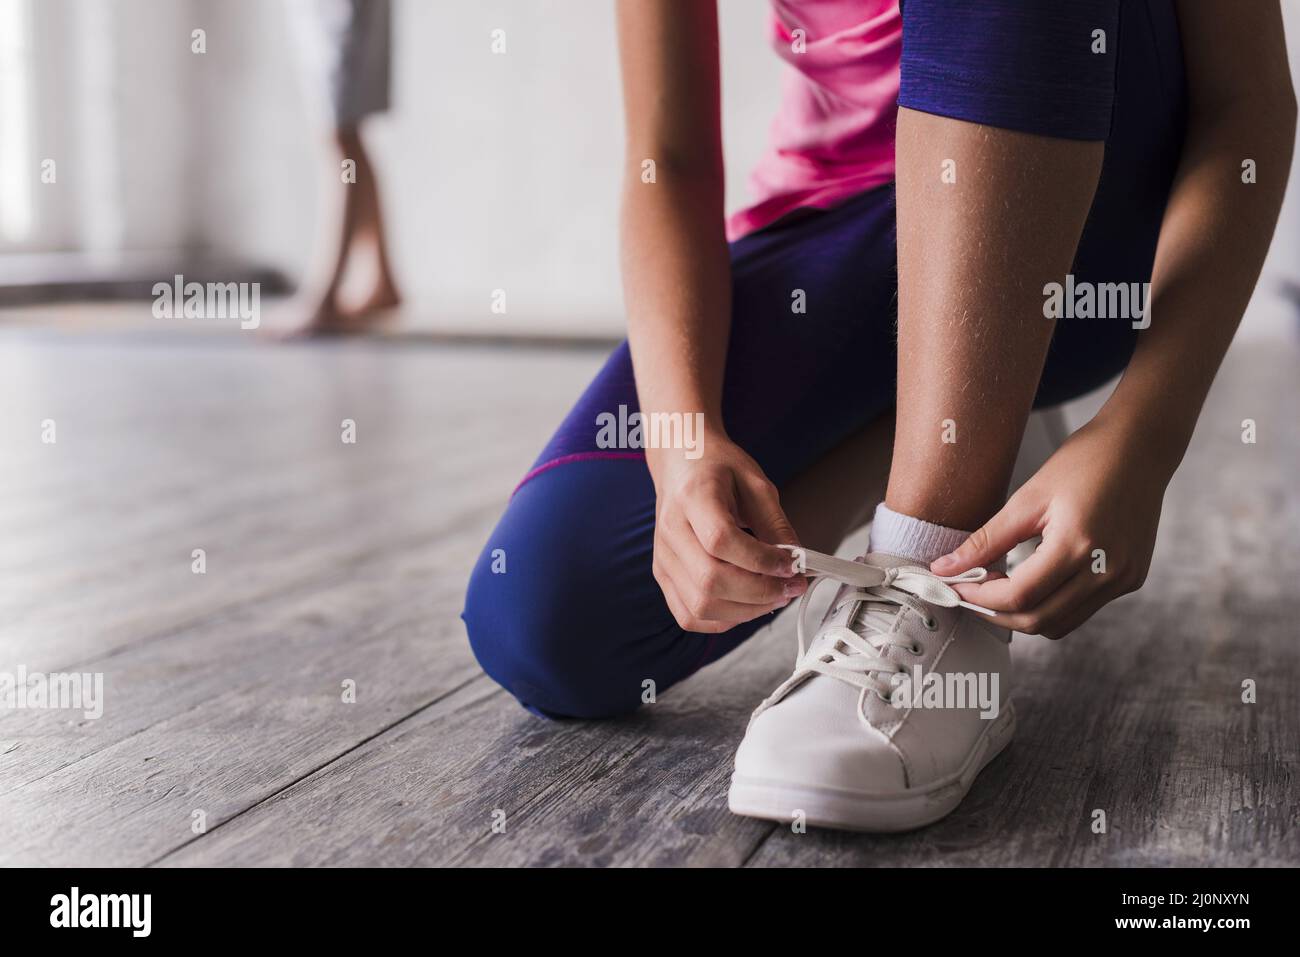 Low section girl tying shoelace white shoes. High quality and resolution beautiful photo concept Stock Photo